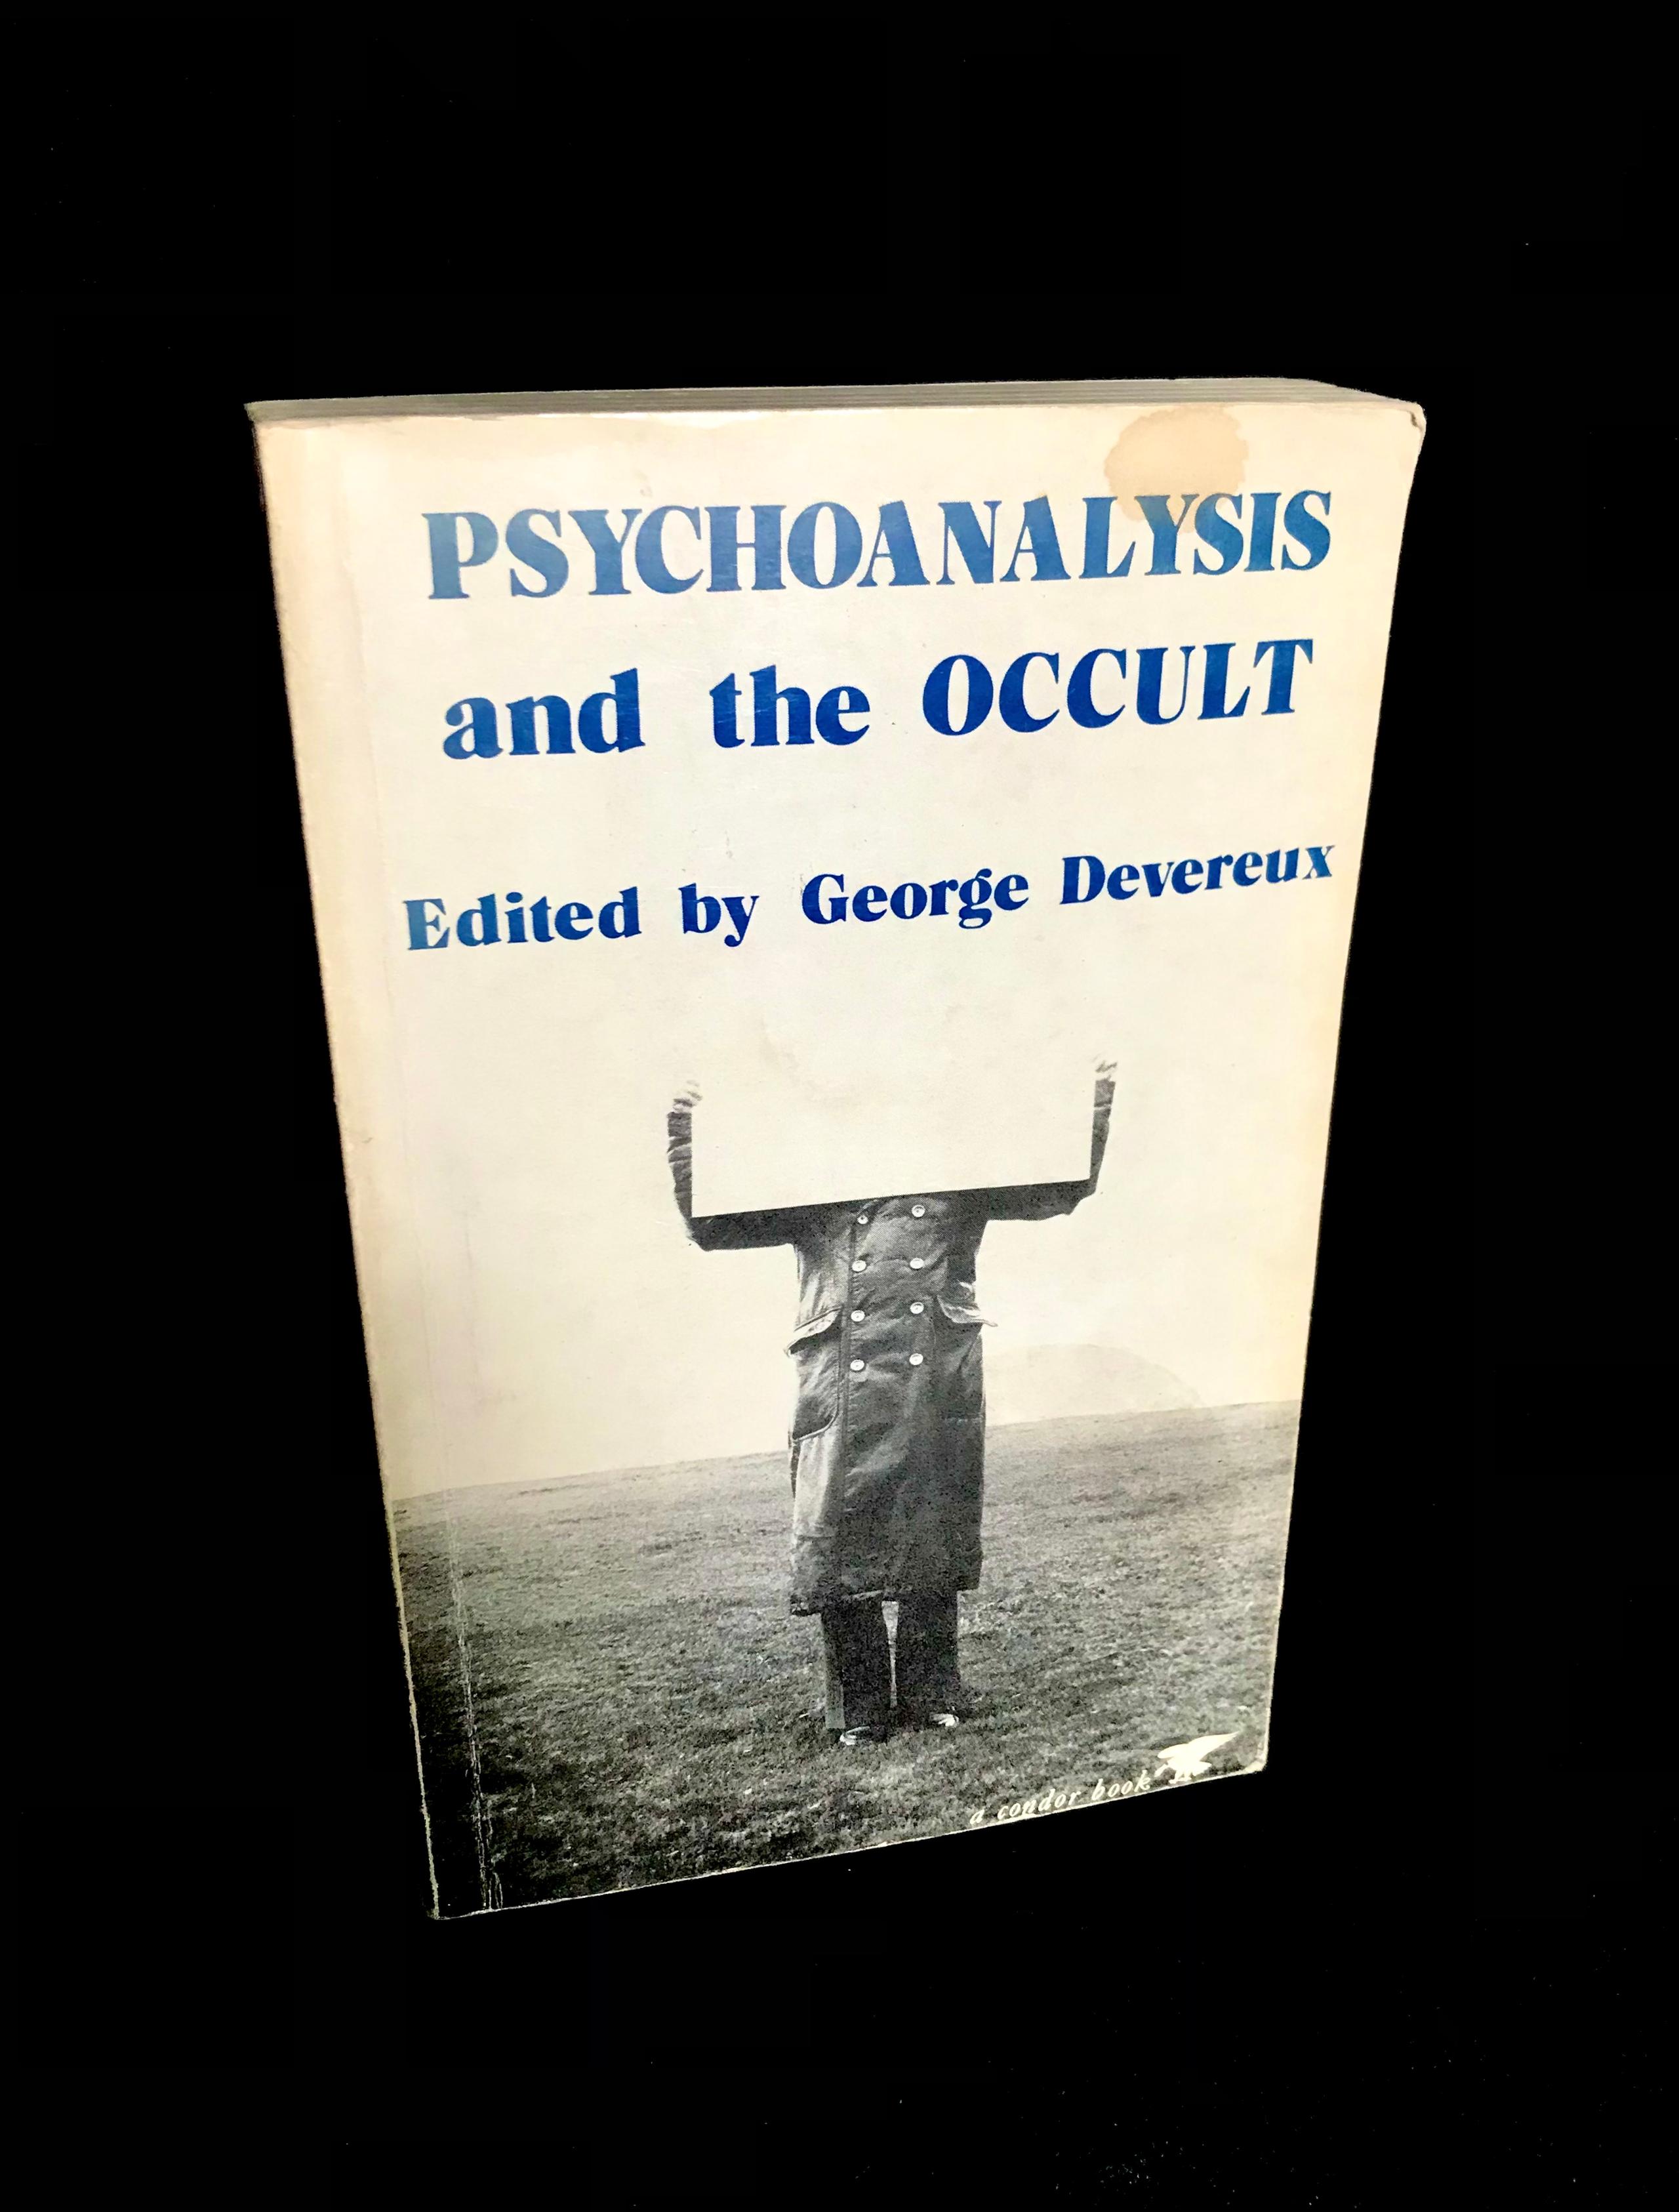 Psychoanalysis and the Occult Edited by George Devereux